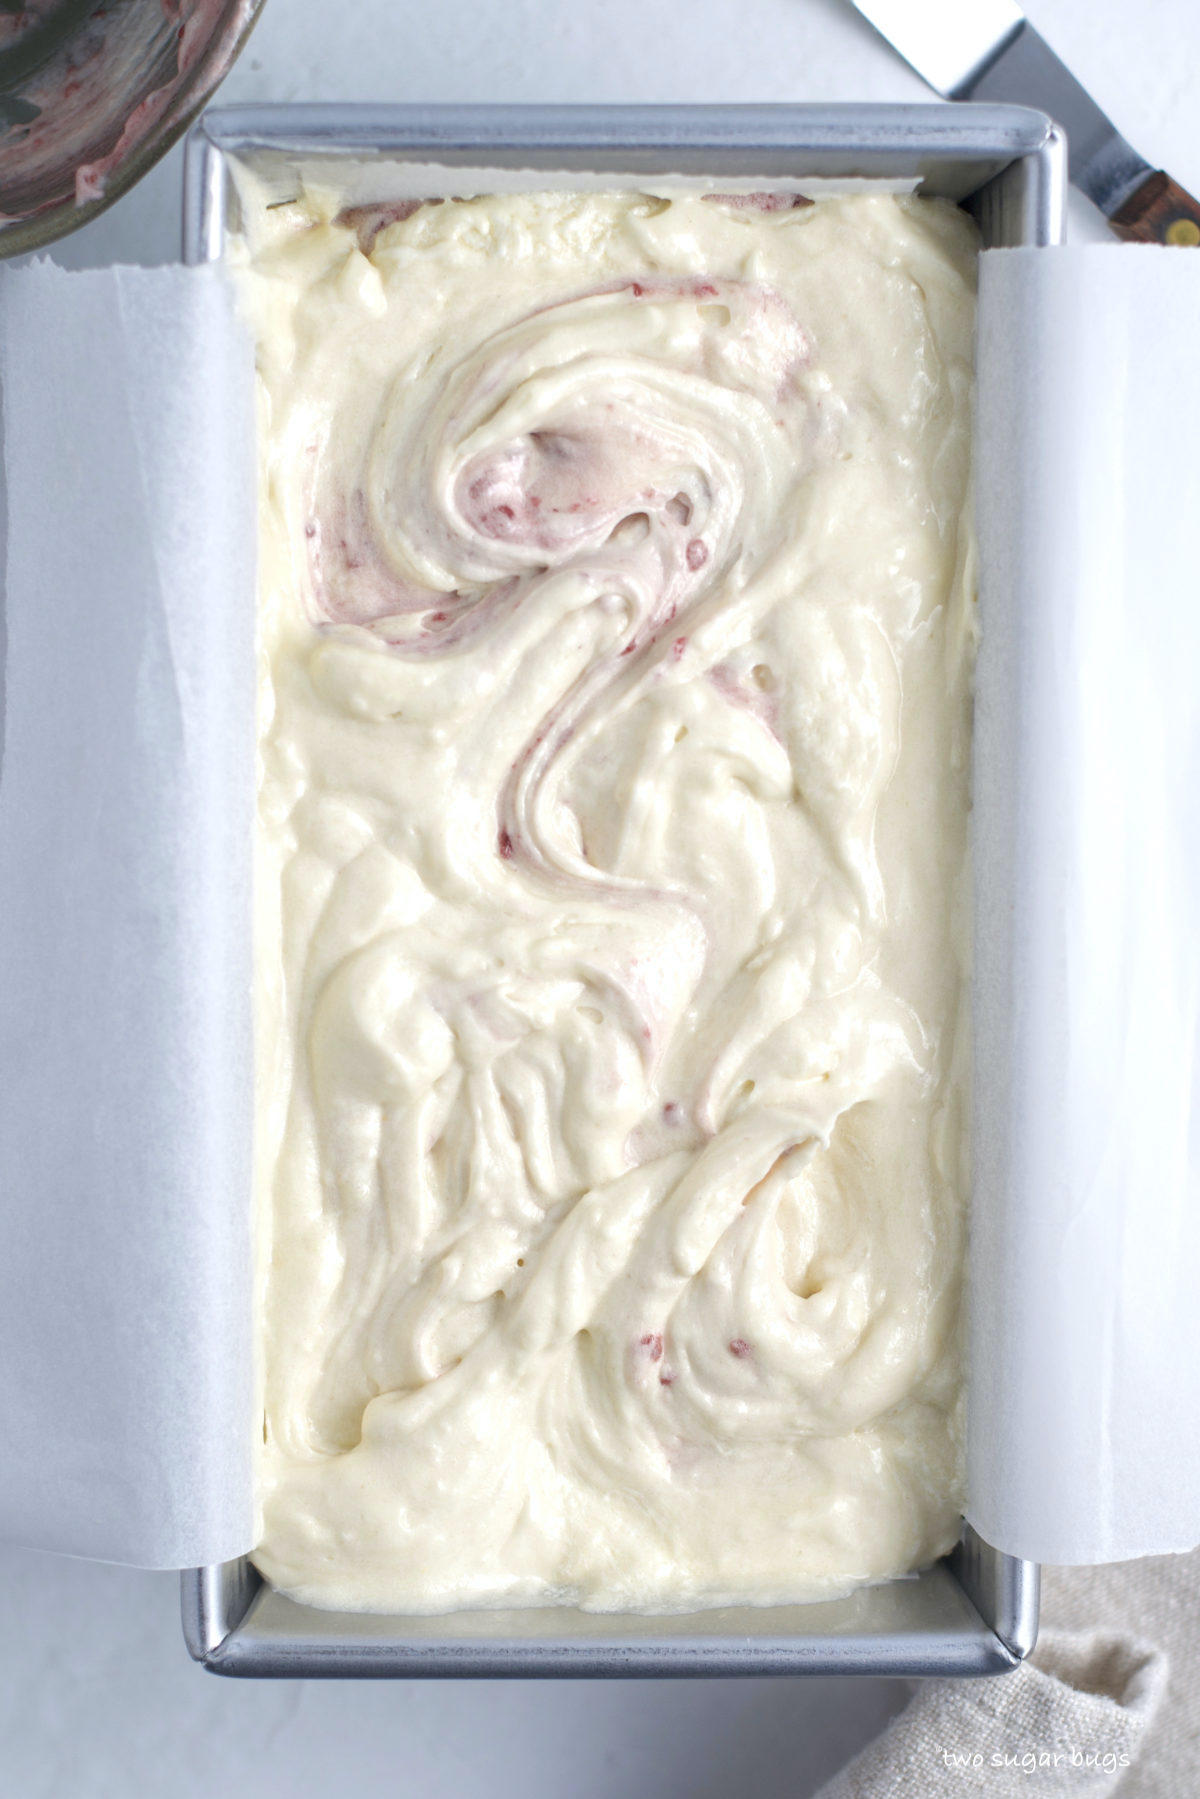 raspberry white chocolate cake batter swirled together in the baking pan